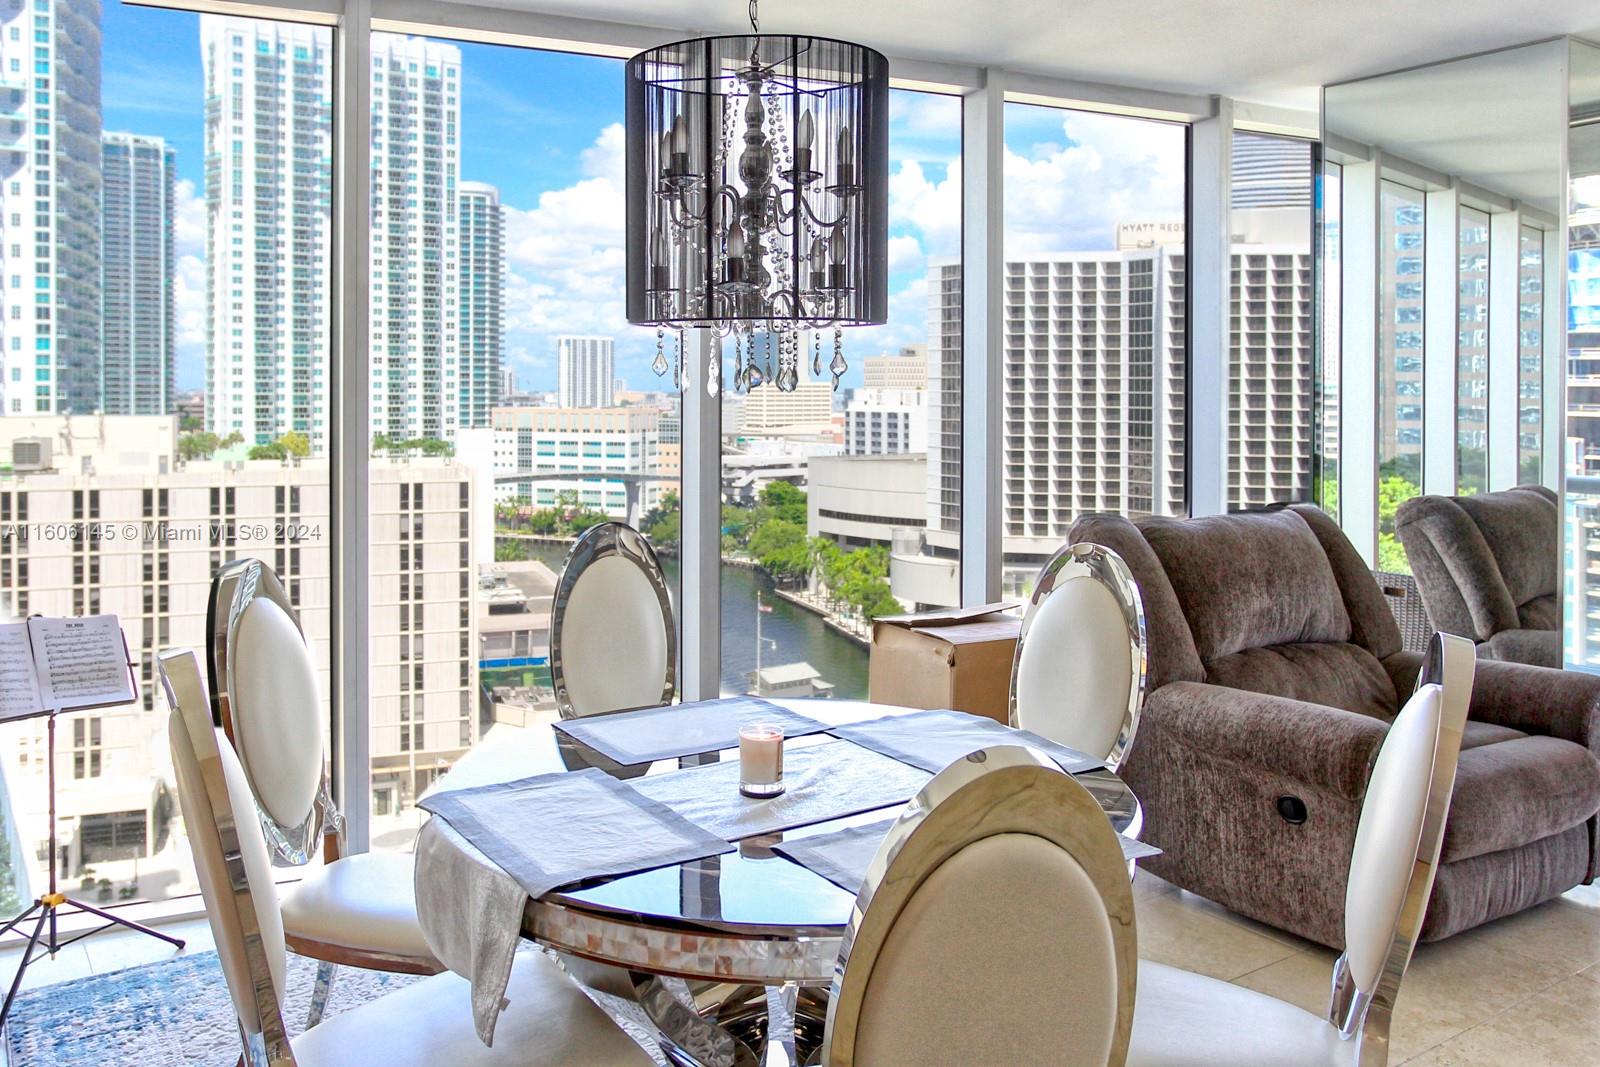 Great CORNER UNIT (the most desirable unit)! LOCATION, LOCATION, WITH AN AMAZING VIEW!!! In the heart of Brickell. Kitchen is equipped with high-end appliances. This is for those who want the convenience of having everything around! Walking distance to Whole Foods, Brickell City Center, restaurants, etc... The amenities include an amazing spa, pool, fitness center, juice bar, spinning, yoga room, theater, billiard, social room, and the BEST: One floor above the amenities, you don't even need to wait for elevator! What are you waiting for? This place is perfect for you!!!